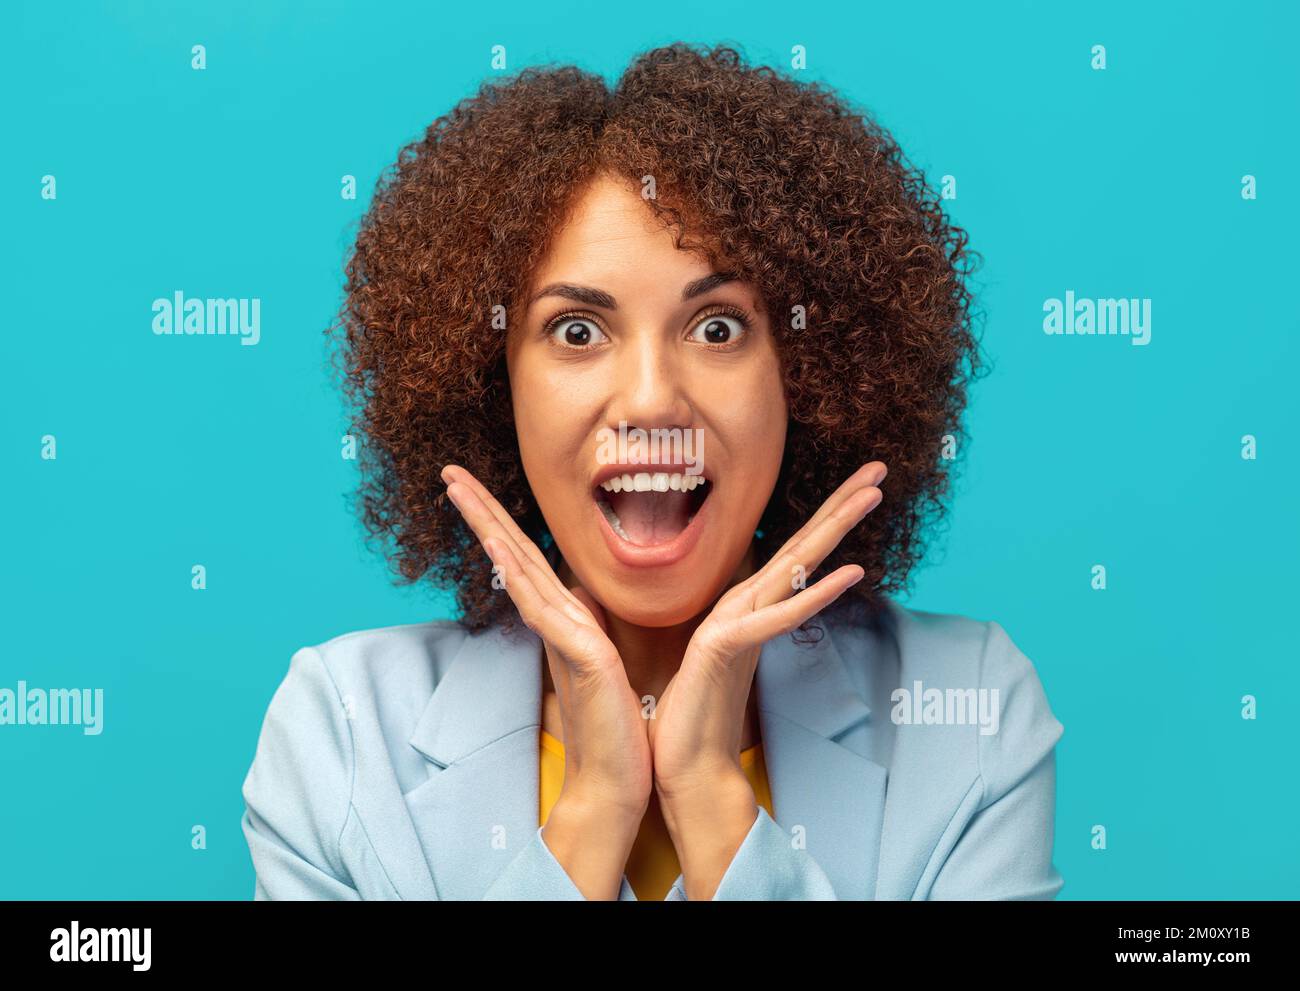 Good news, sale, shopping or big discounts concept. African American woman with curly hair screaming wow Stock Photo